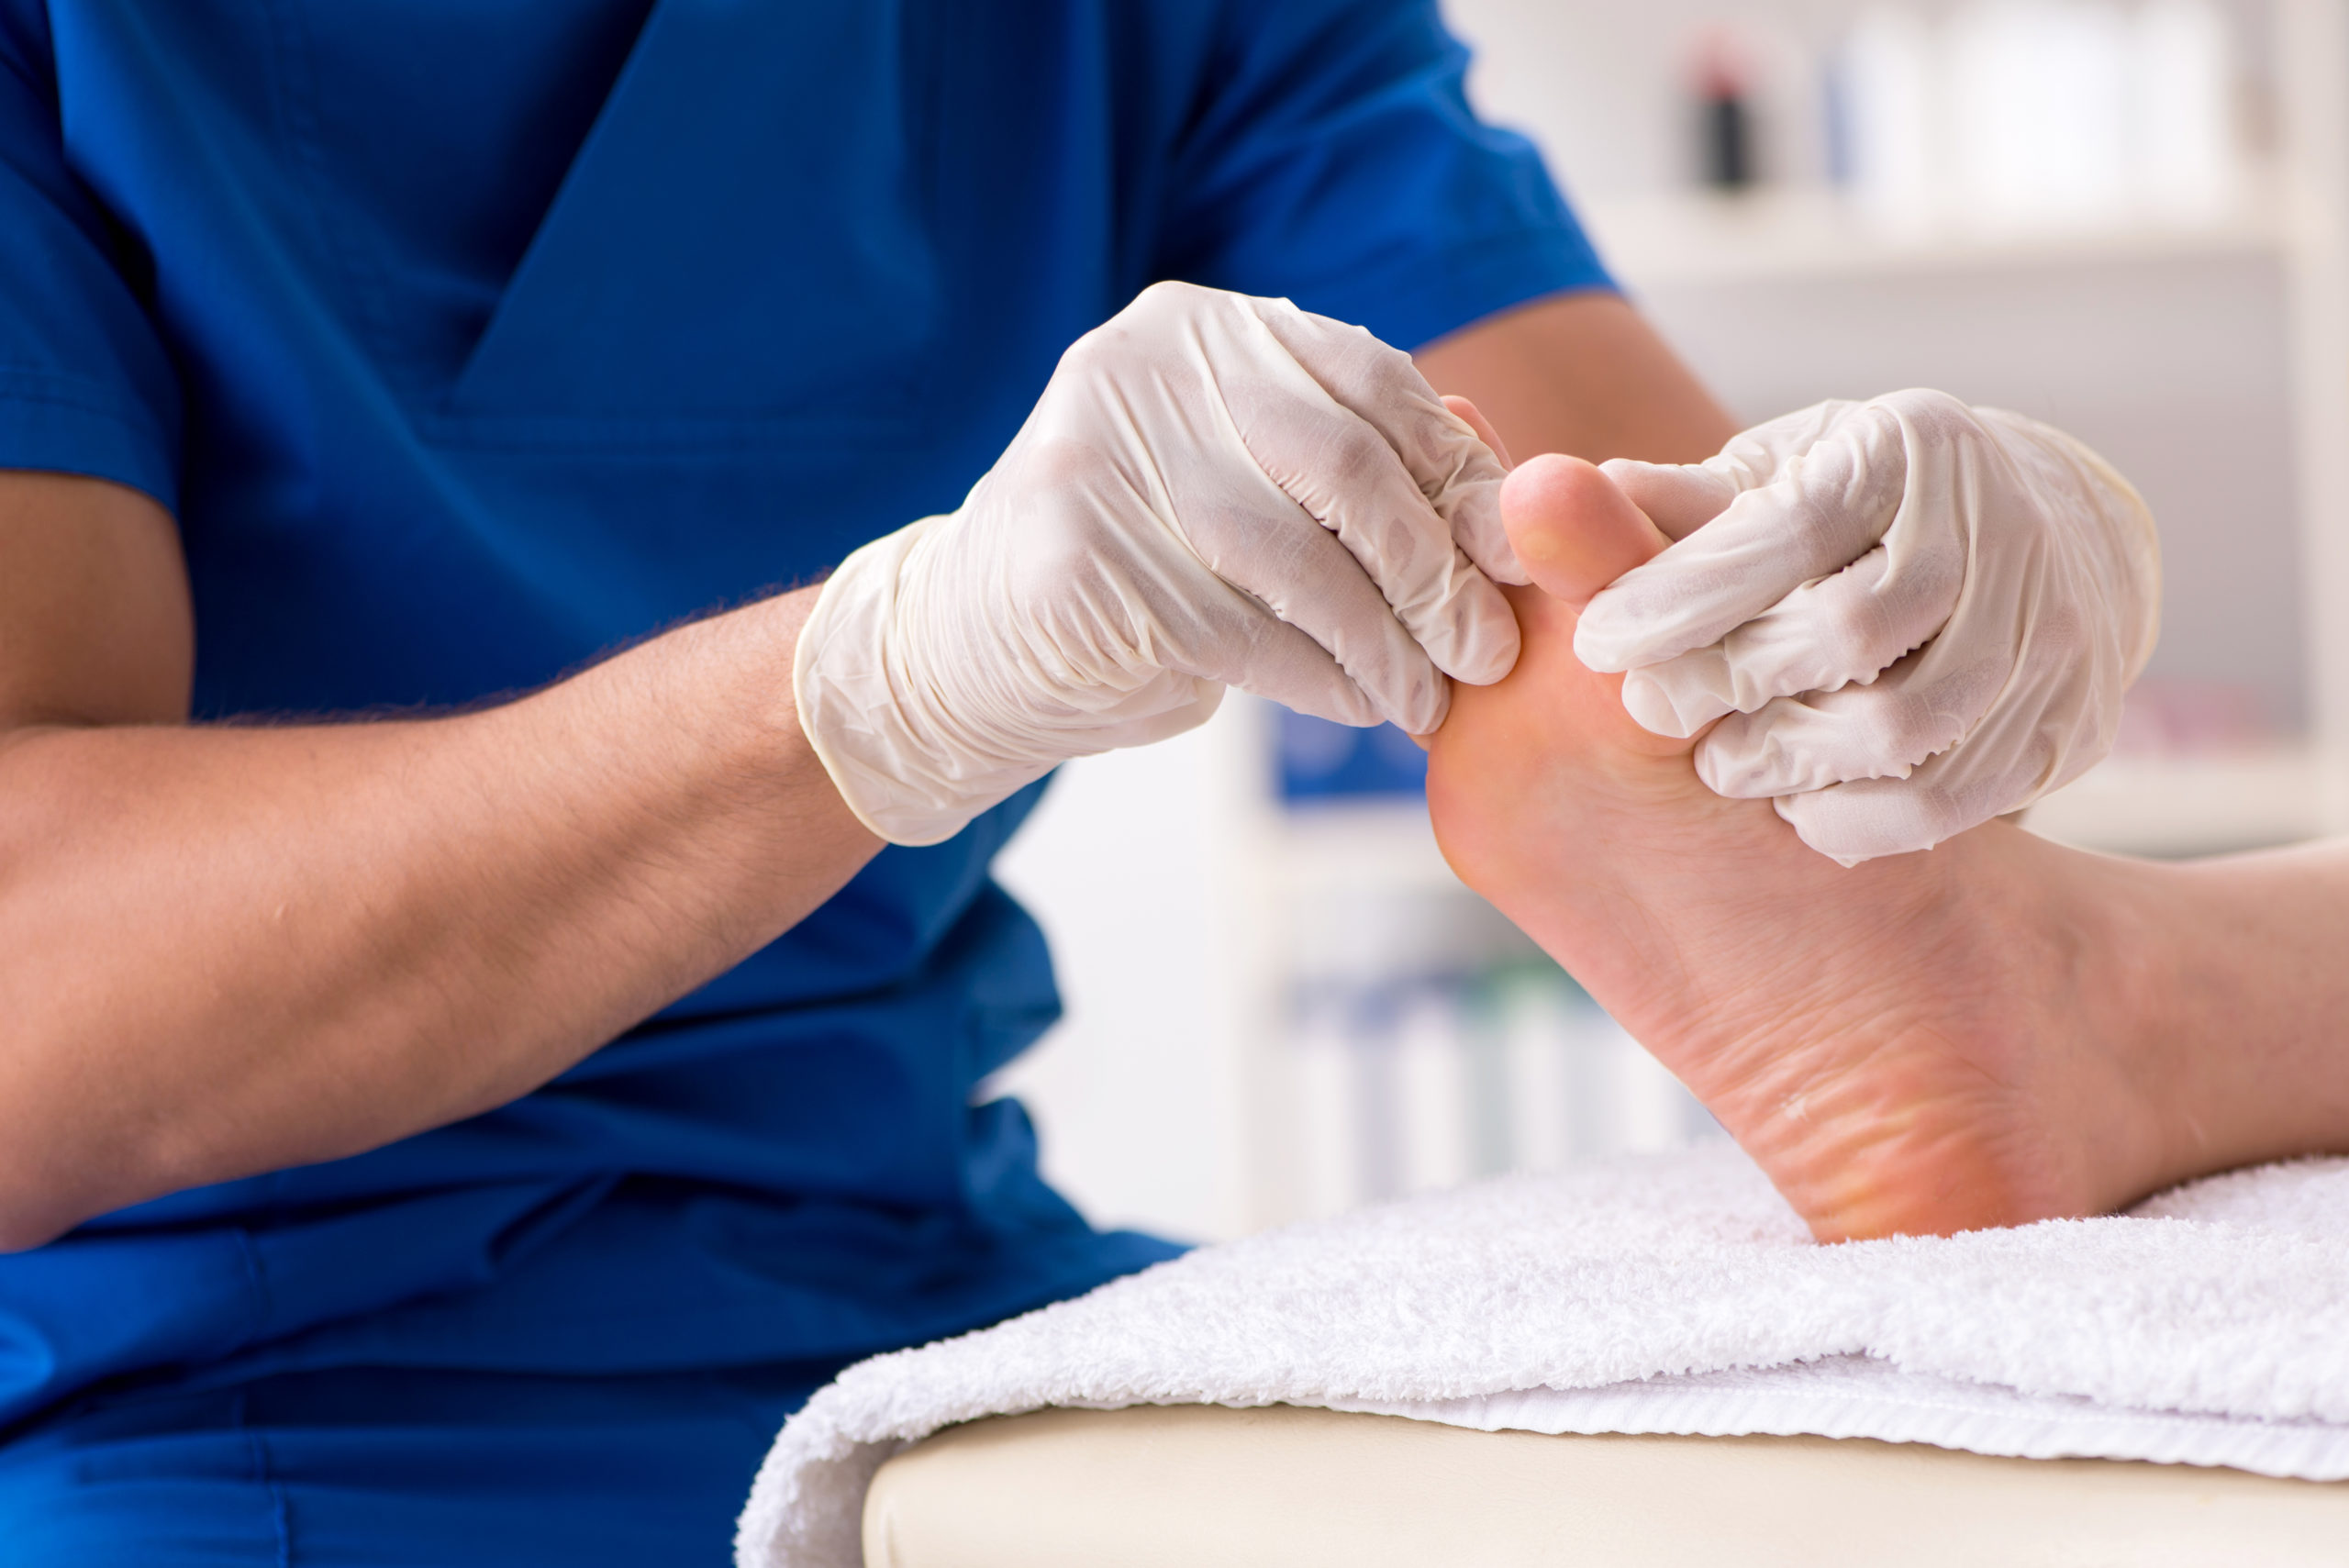 How to keep your feet healthy, according to podiatrists